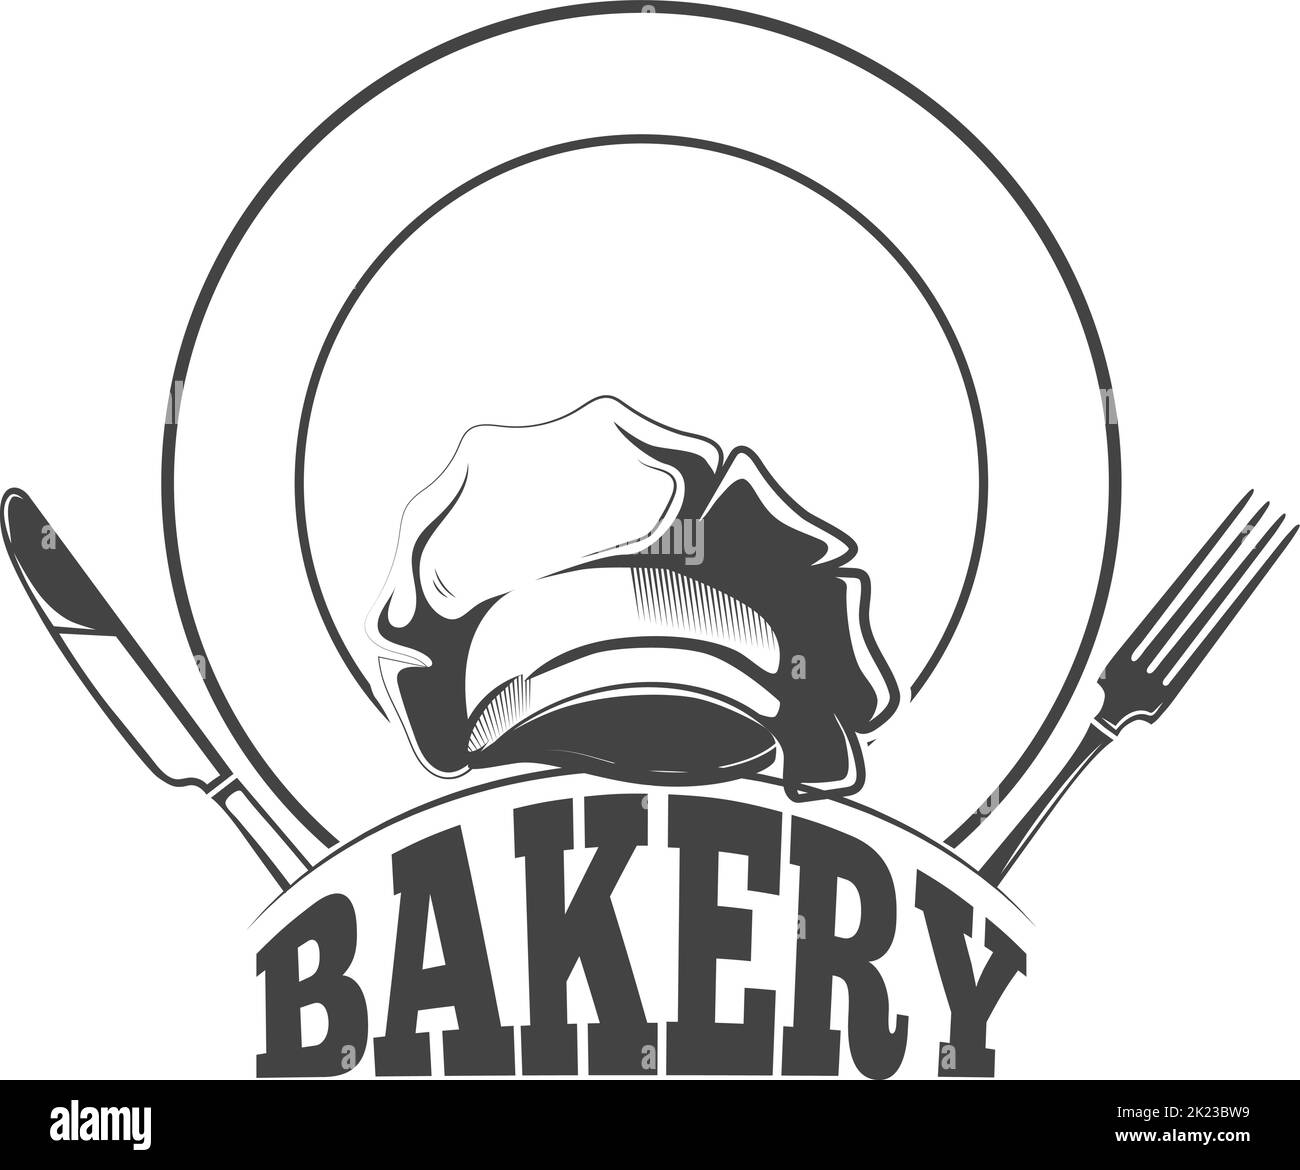 Bakery emblem. Pastry cafe black label template Stock Vector